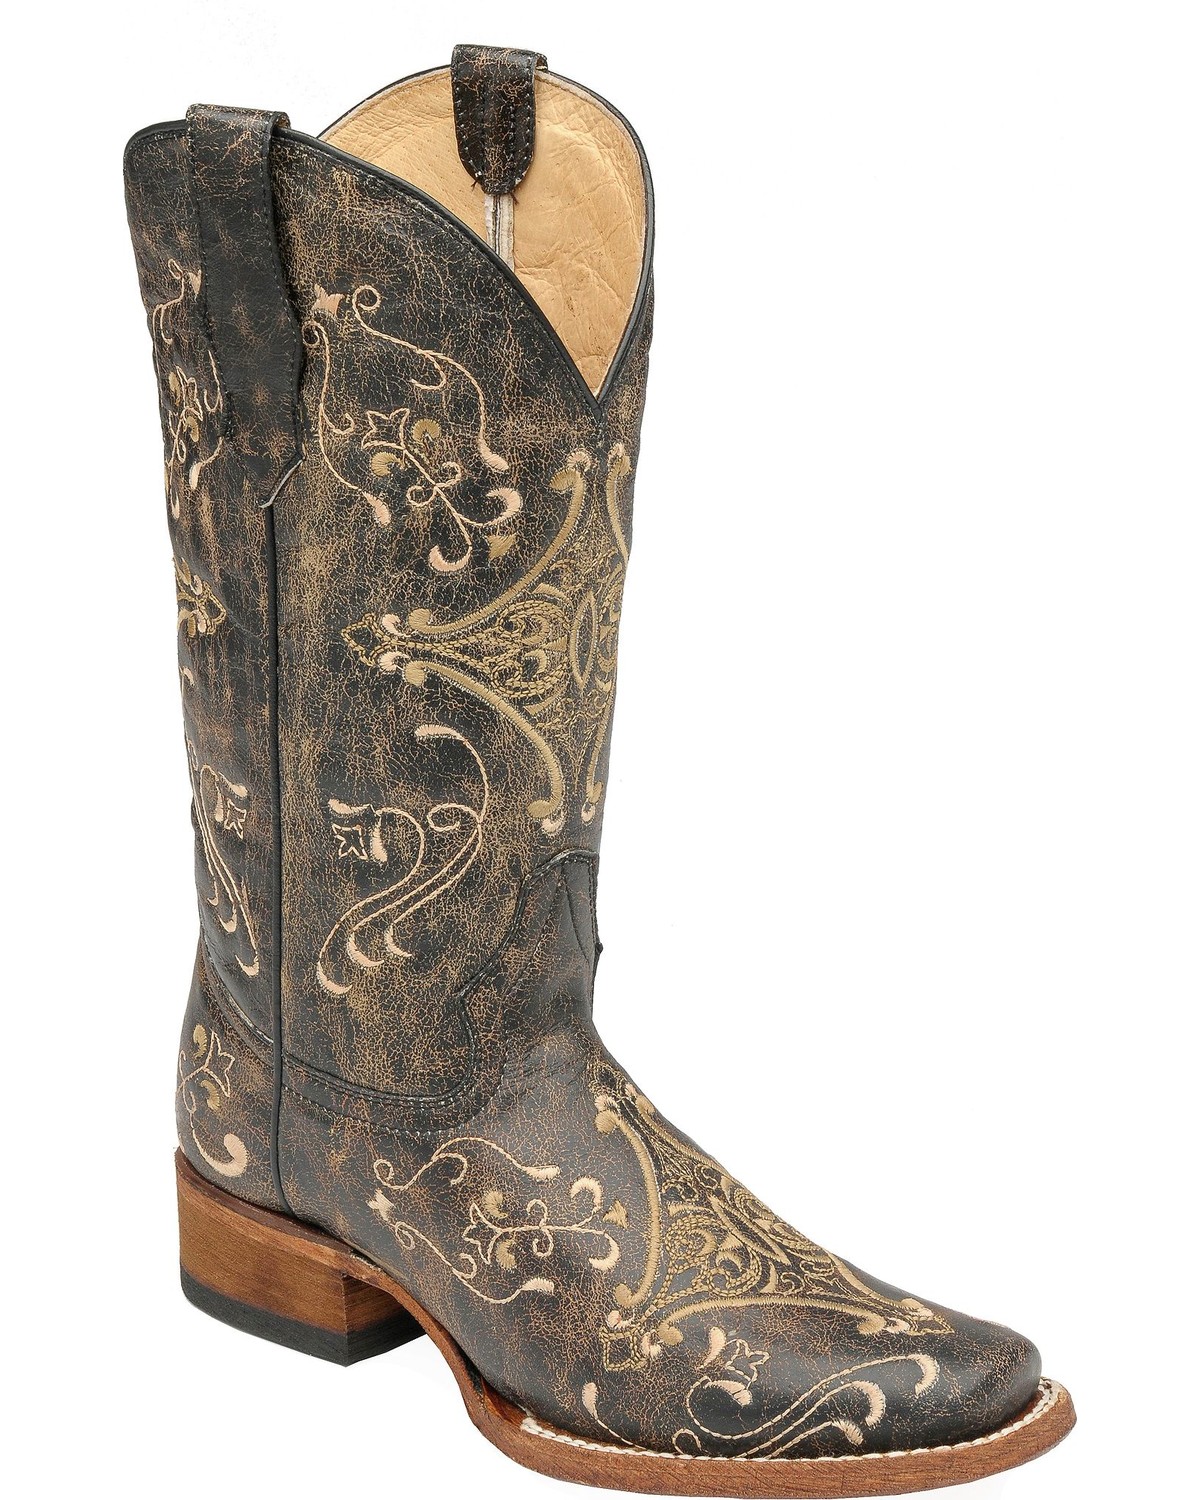 circle g embroidered cowboy boot